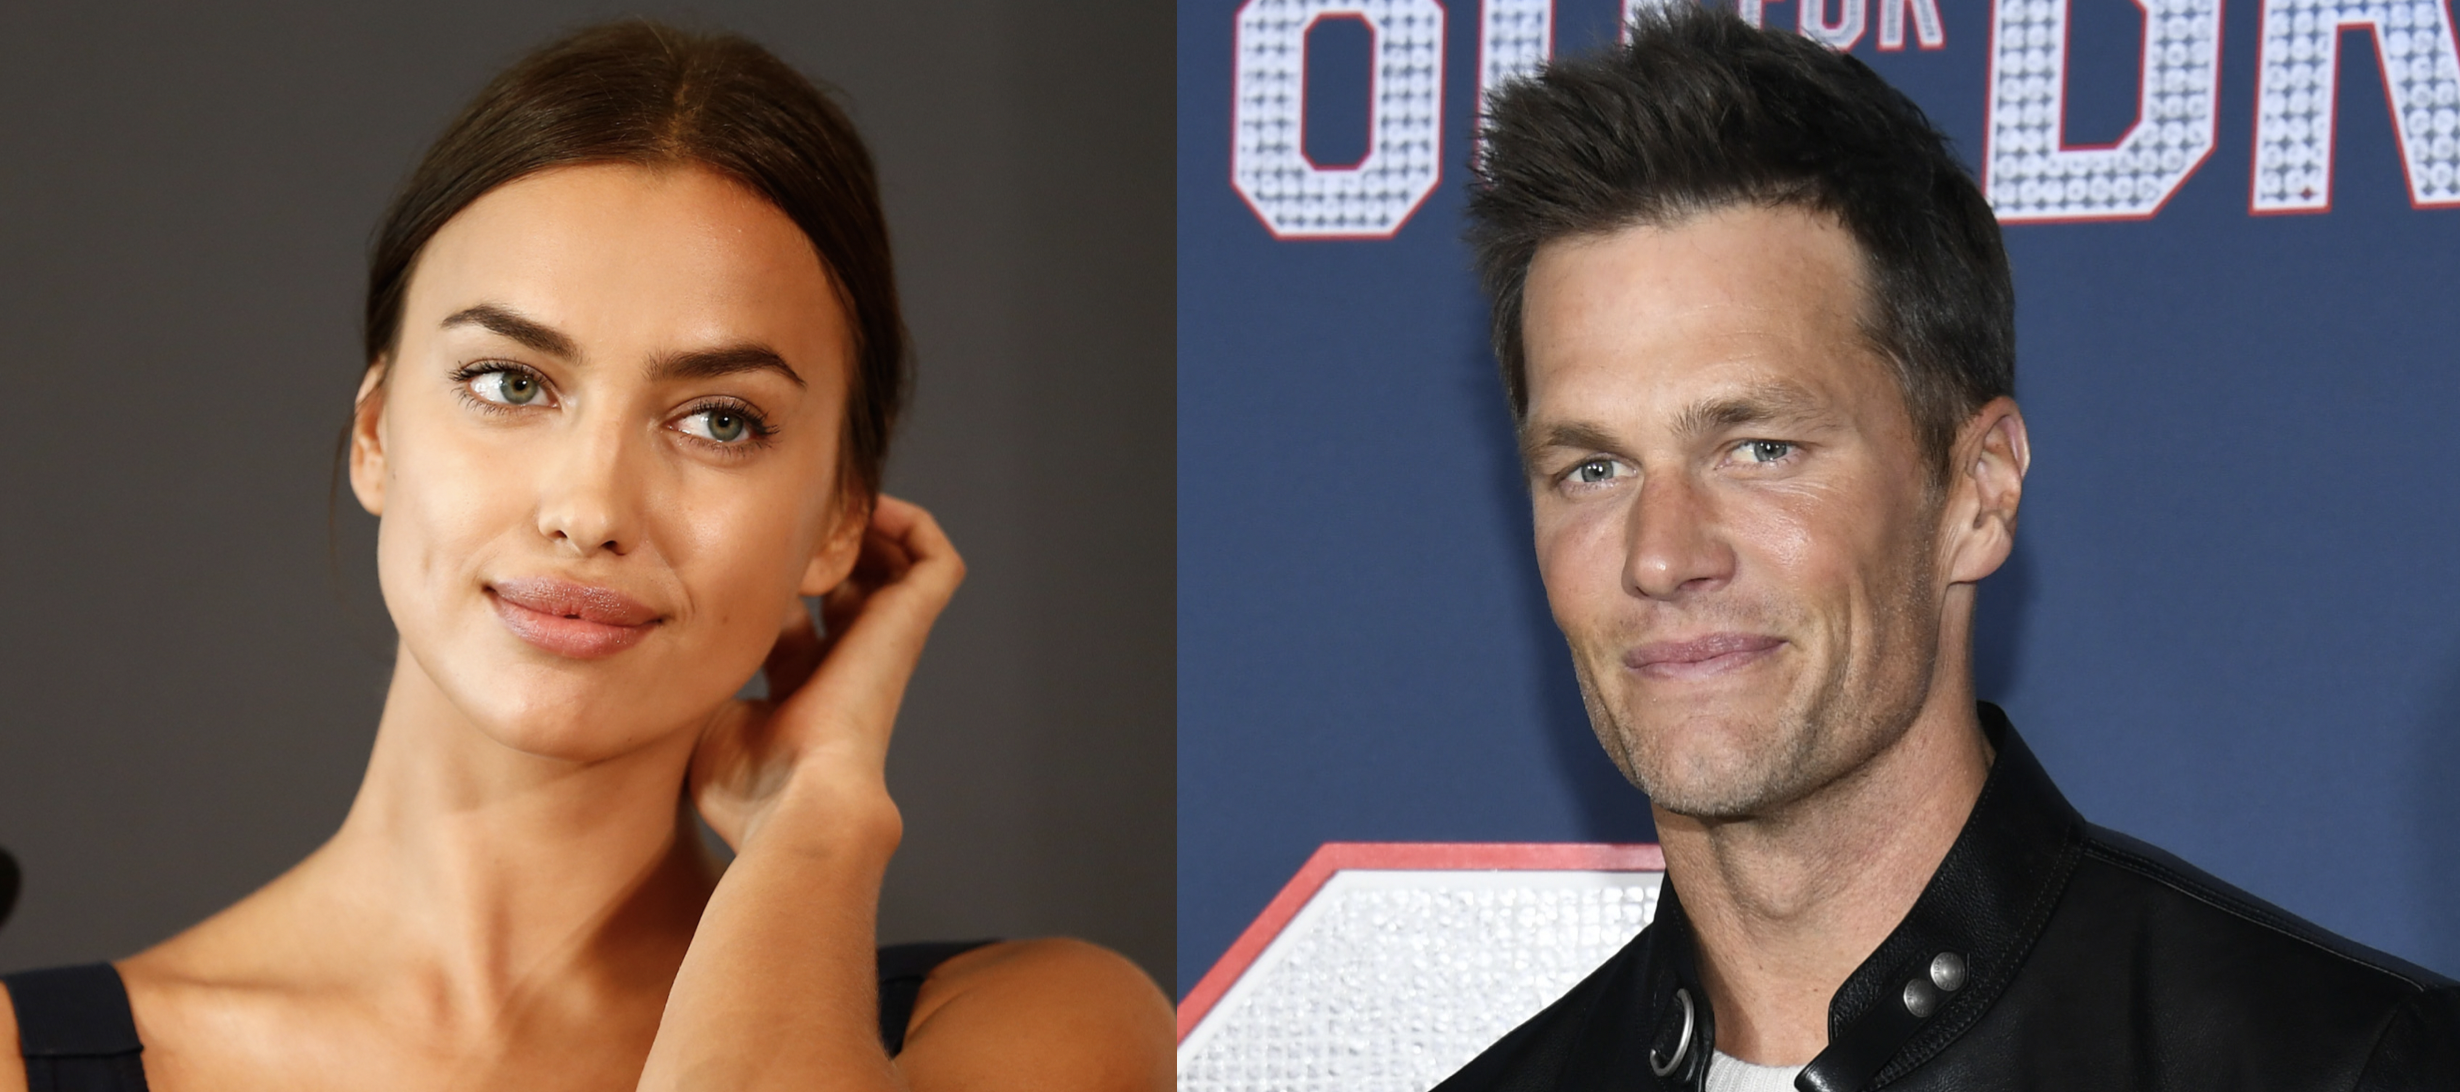 Irina Shayk's friends saying she is playing a love game with Brady & Cooper  - NFL Exclusive